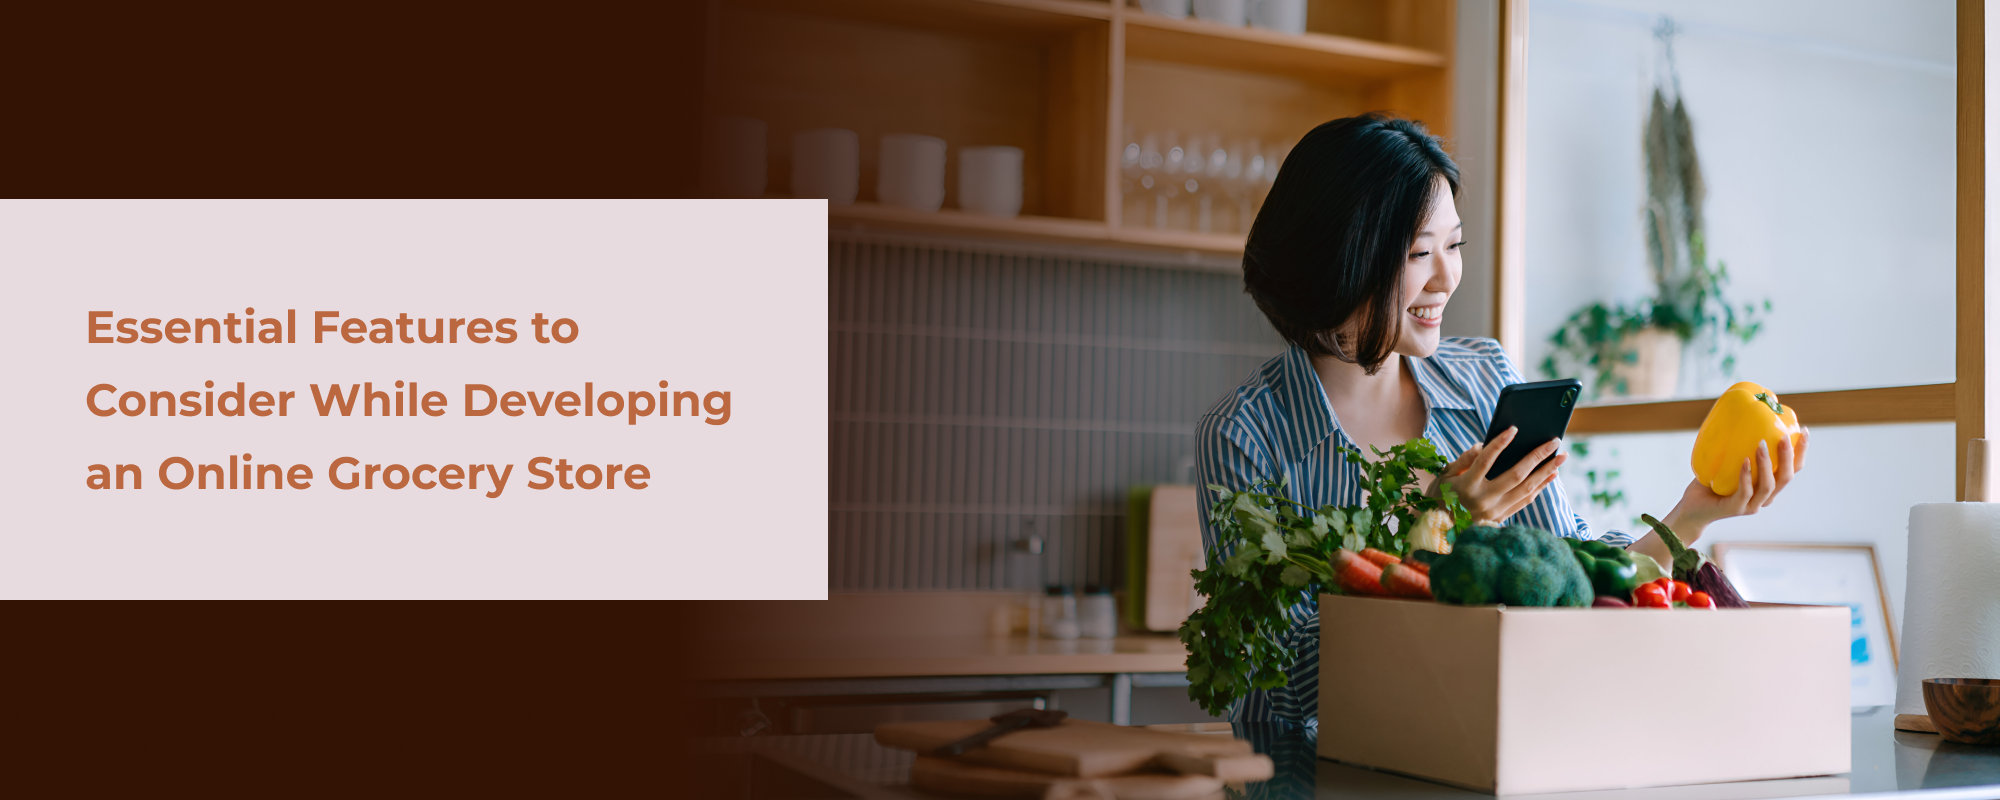 Essential Features to Consider While Developing an Online Grocery Store